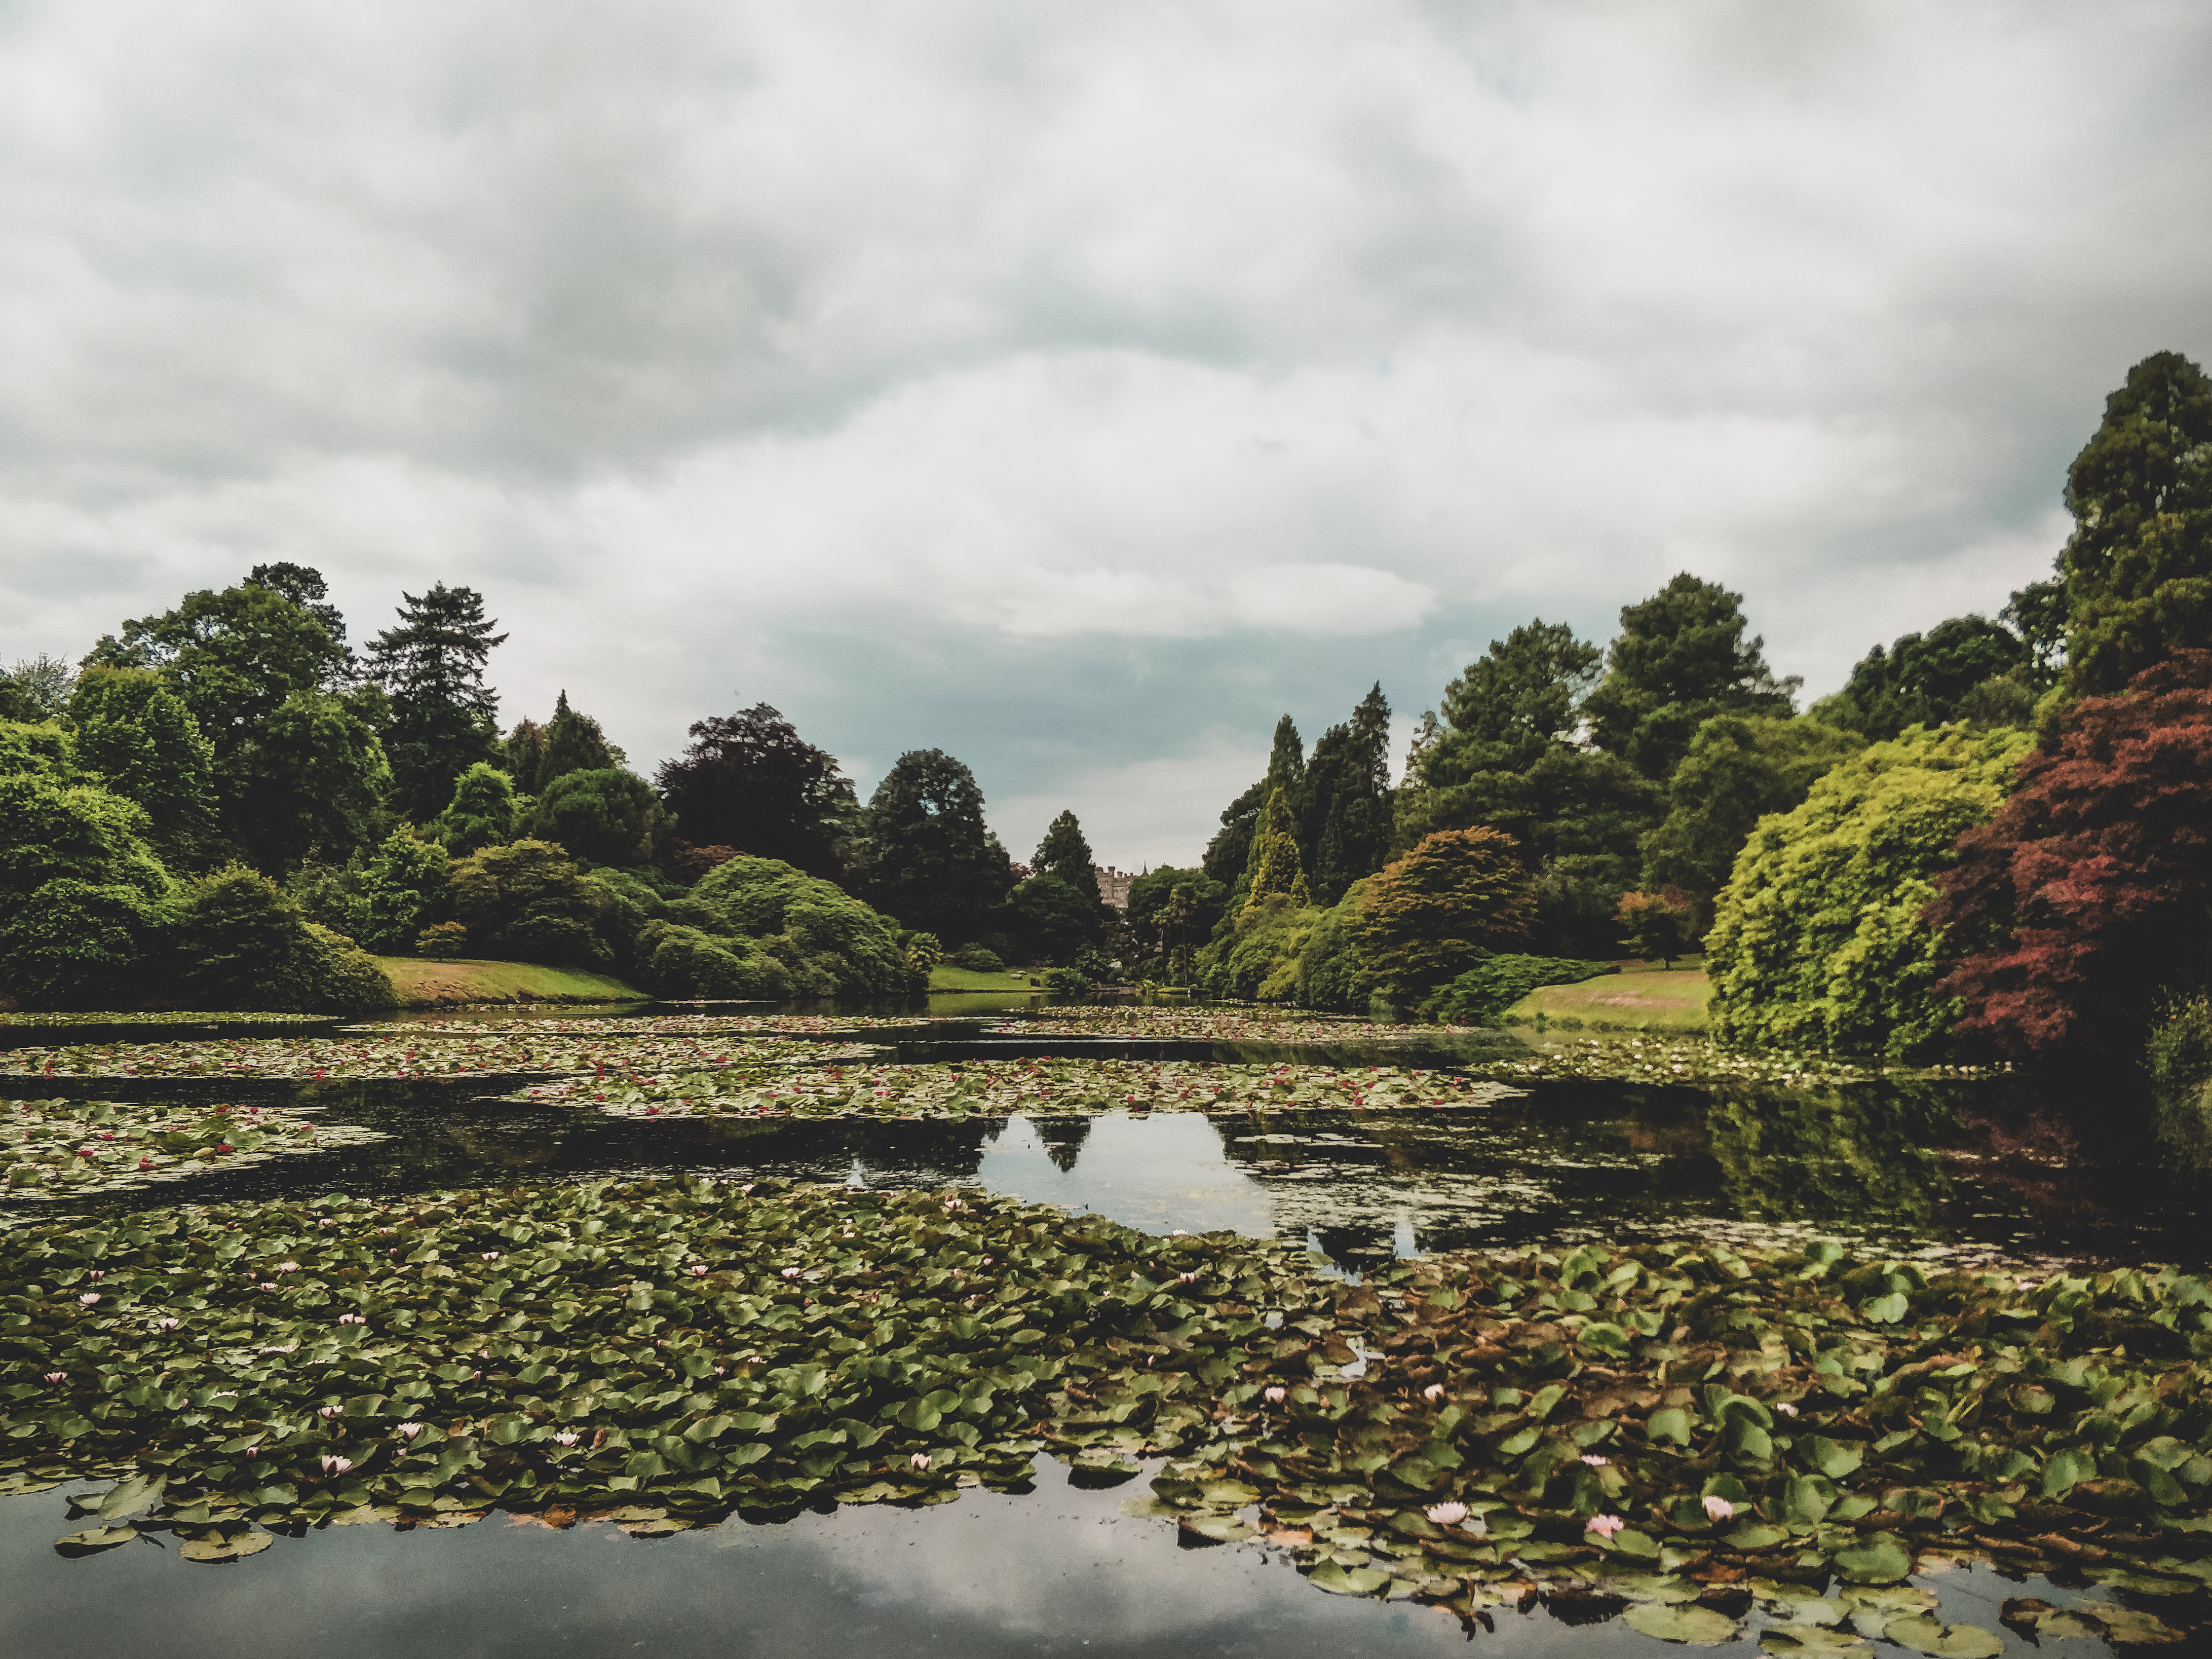 A vast array of waterlillies on the Sheffield Park lake